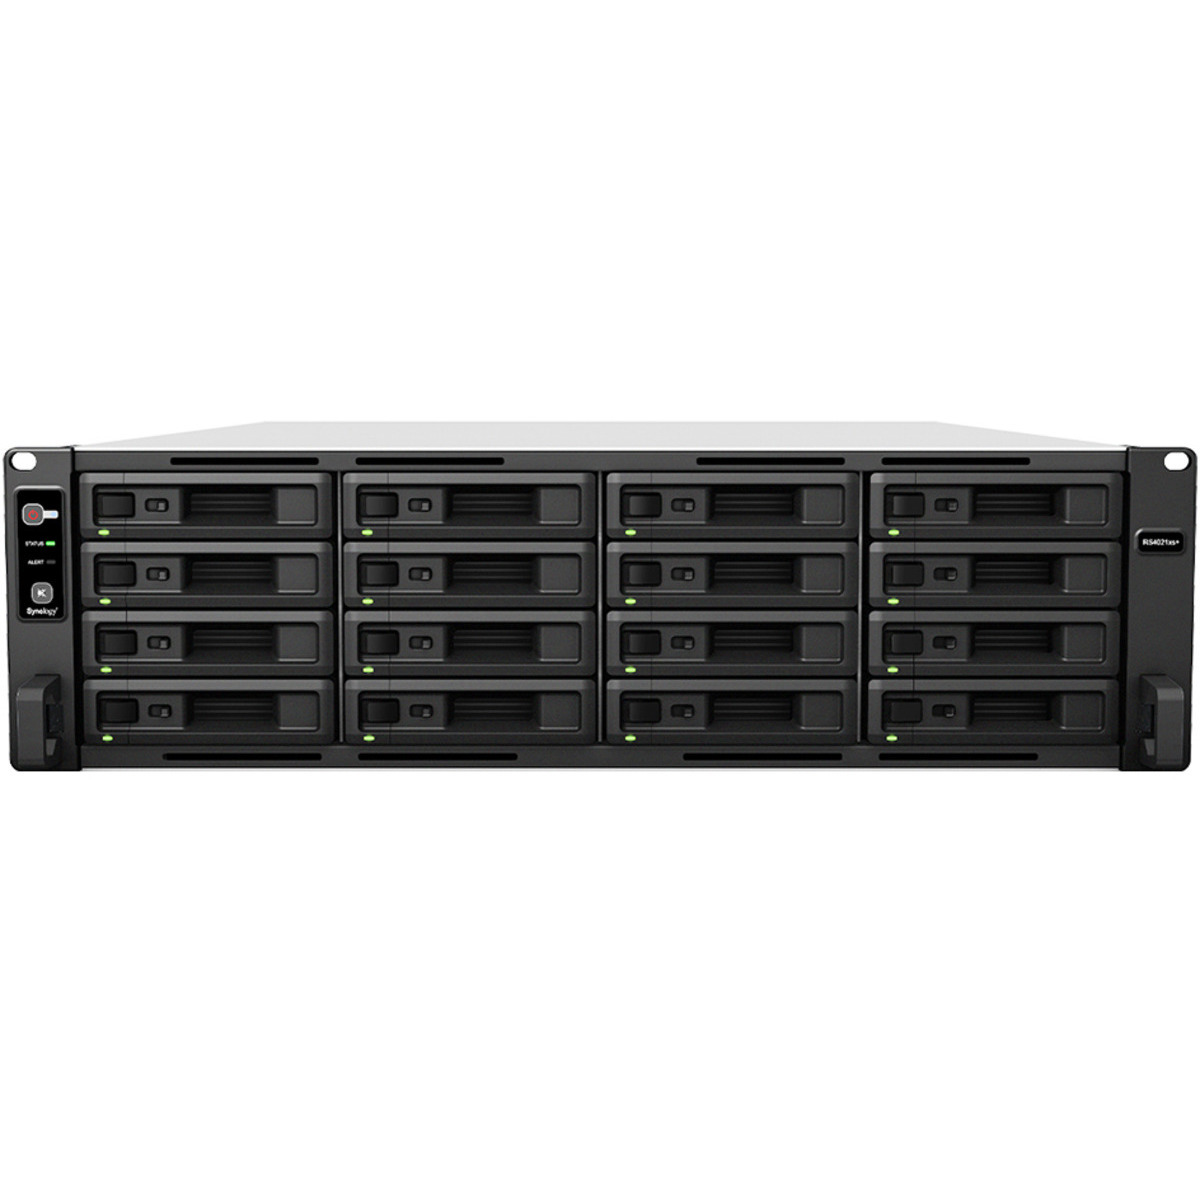 buy Synology RackStation RS4021xs+ 160tb RackMount NAS - Network Attached Storage Device 16x10000gb Seagate IronWolf Pro ST10000NT001 3.5 7200rpm SATA 6Gb/s HDD NAS Class Drives Installed - Burn-In Tested - ON SALE - nas headquarters buy network attached storage server device das new raid-5 free shipping simply usa RackStation RS4021xs+